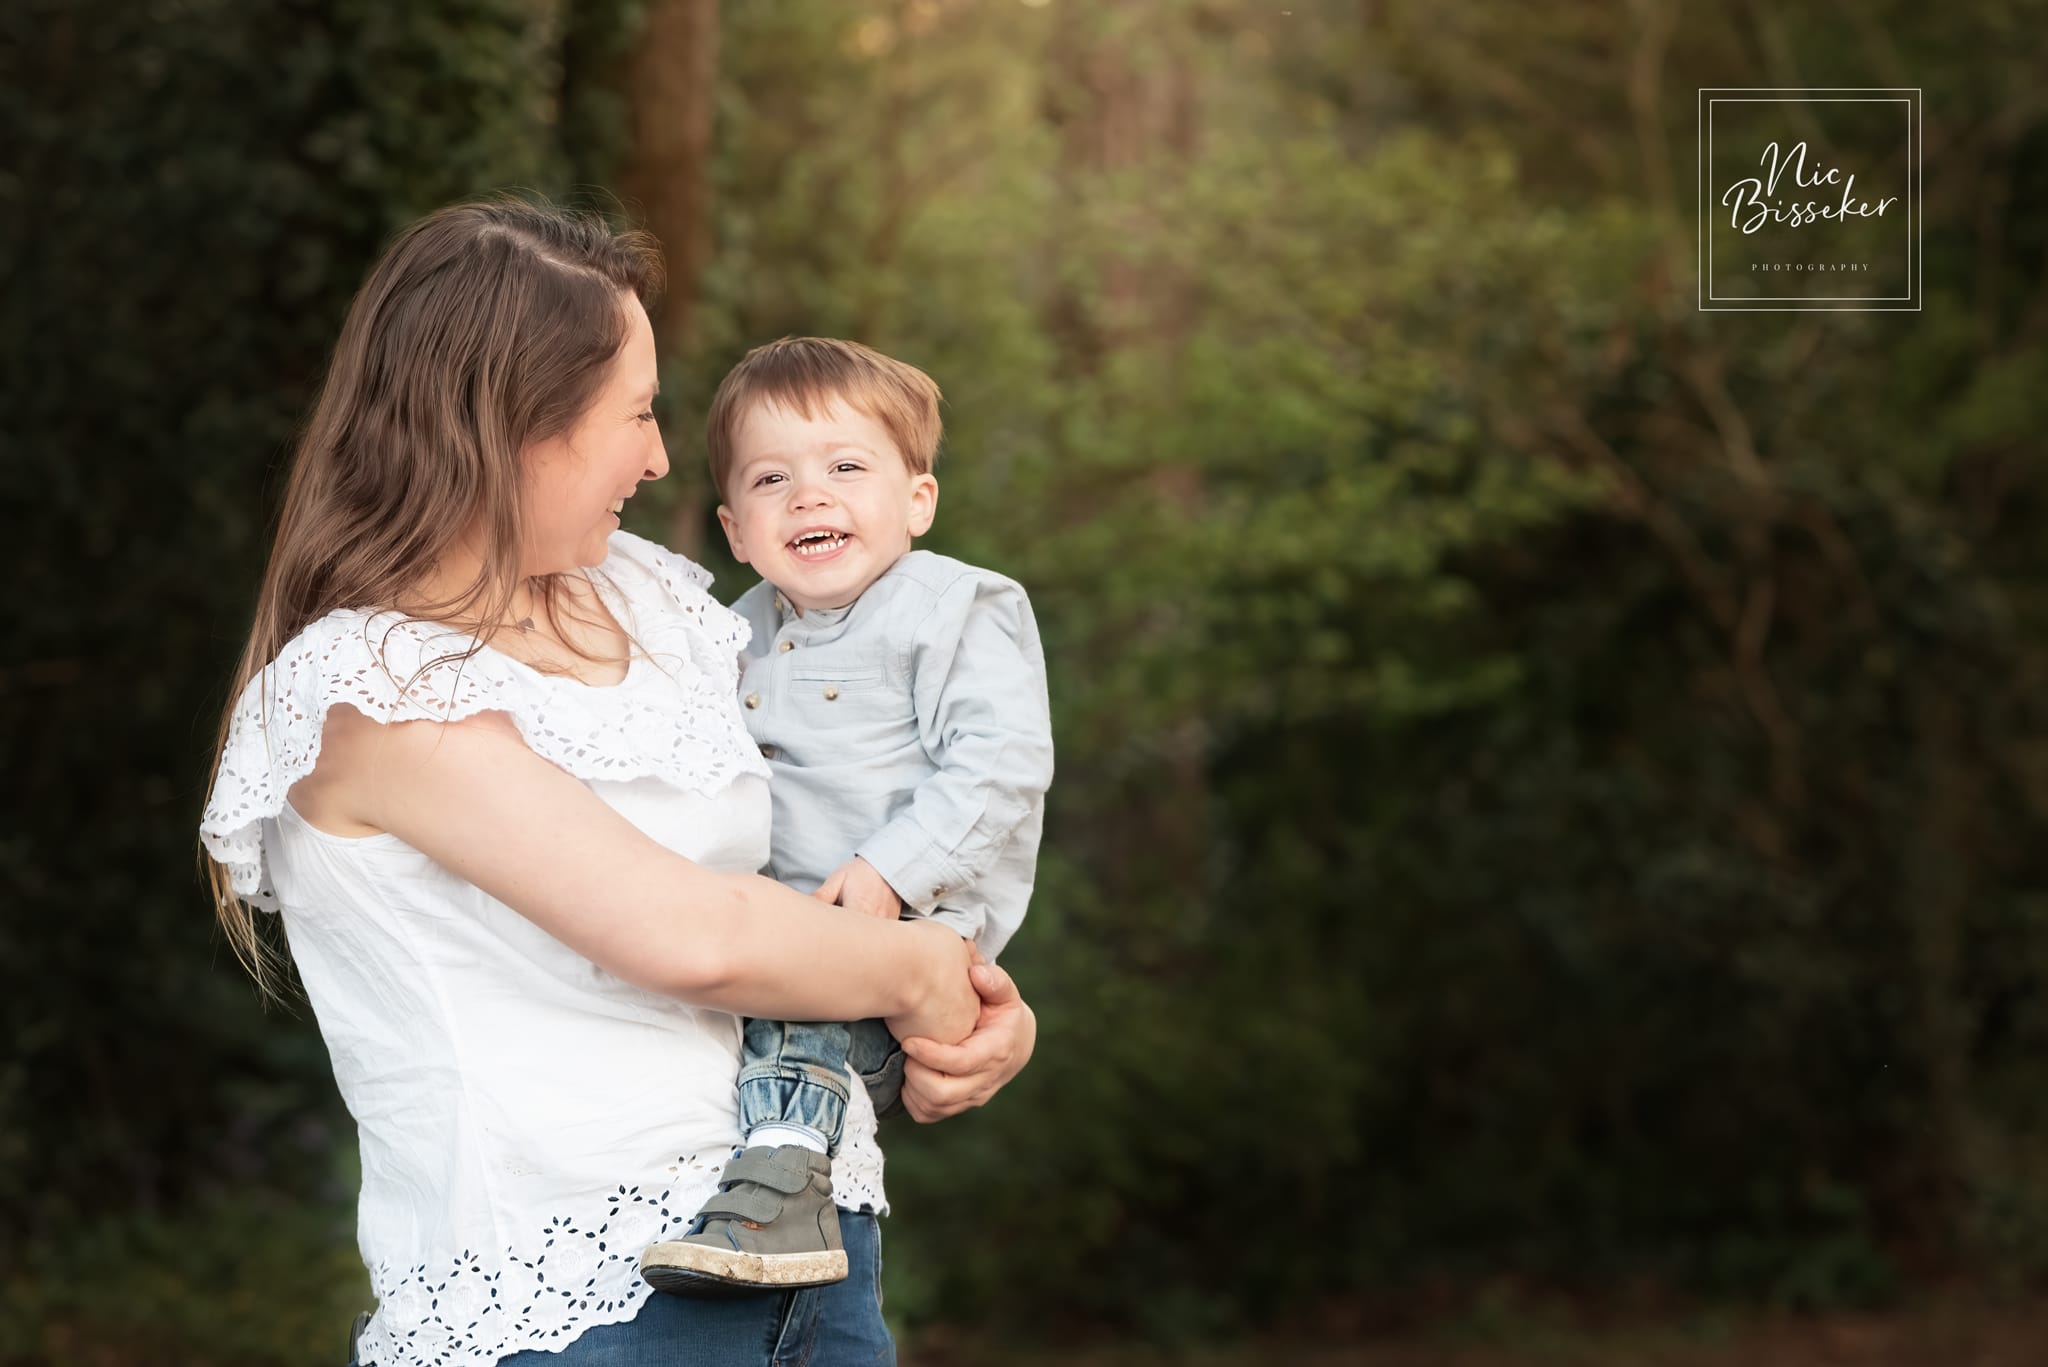 Nic Bisseker photography bluebell mini sessions kent